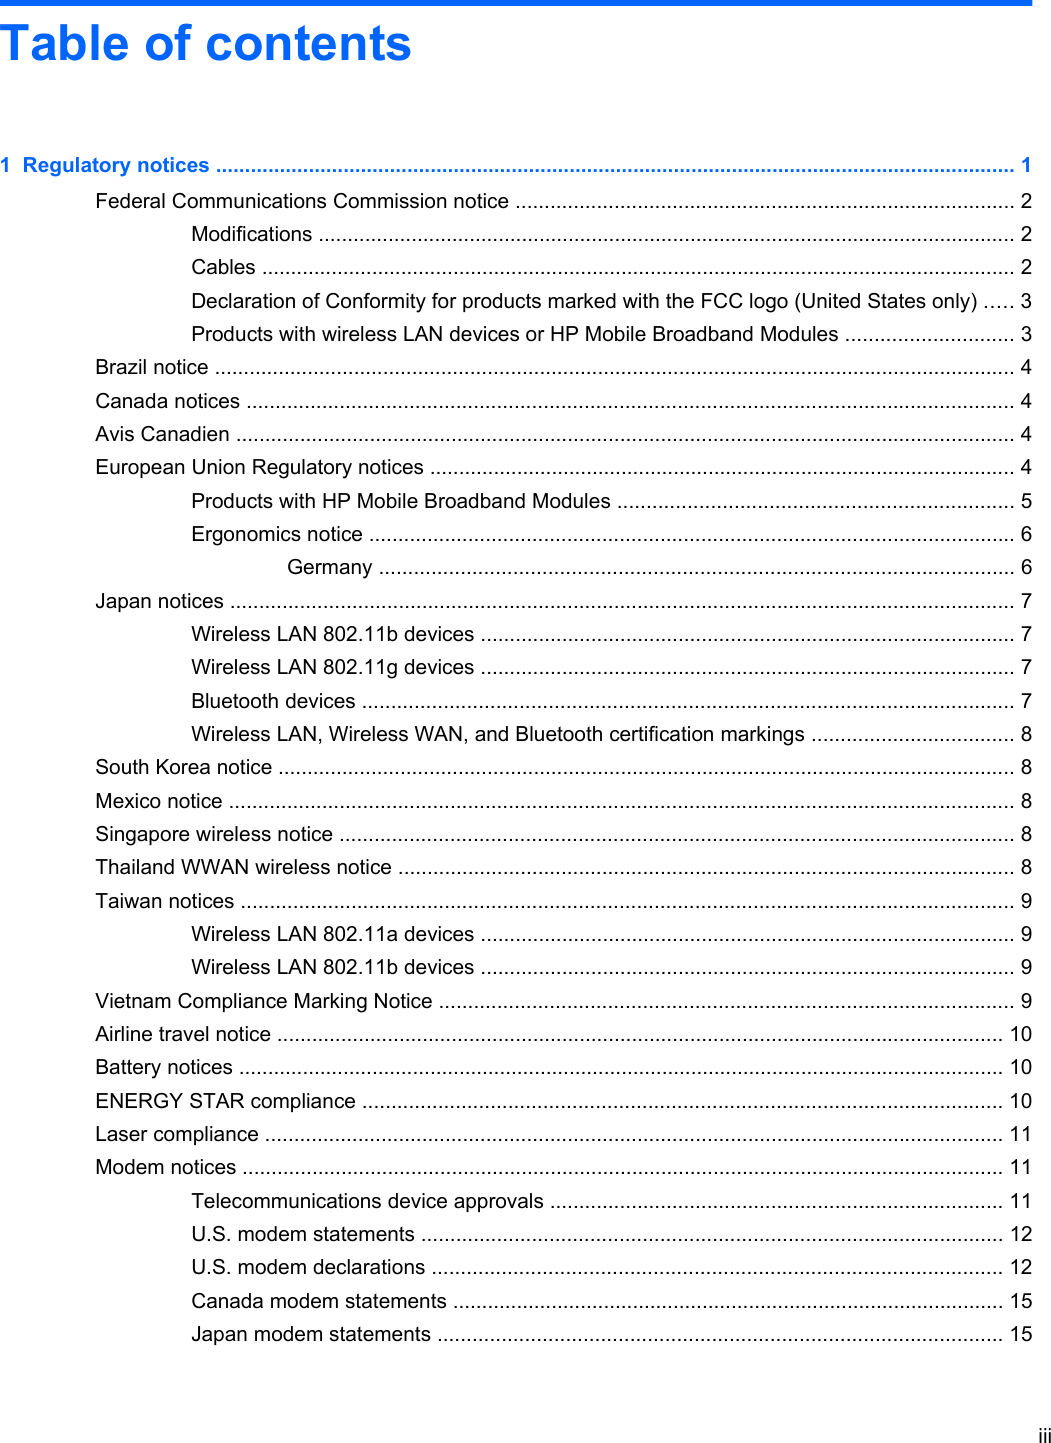 Table of contents1  Regulatory notices .......................................................................................................................................... 1Federal Communications Commission notice ...................................................................................... 2Modifications ........................................................................................................................ 2Cables .................................................................................................................................. 2Declaration of Conformity for products marked with the FCC logo (United States only) ..... 3Products with wireless LAN devices or HP Mobile Broadband Modules ............................. 3Brazil notice .......................................................................................................................................... 4Canada notices .................................................................................................................................... 4Avis Canadien ...................................................................................................................................... 4European Union Regulatory notices ..................................................................................................... 4Products with HP Mobile Broadband Modules .................................................................... 5Ergonomics notice ............................................................................................................... 6Germany ............................................................................................................. 6Japan notices ....................................................................................................................................... 7Wireless LAN 802.11b devices ............................................................................................ 7Wireless LAN 802.11g devices ............................................................................................ 7Bluetooth devices ................................................................................................................ 7Wireless LAN, Wireless WAN, and Bluetooth certification markings ................................... 8South Korea notice ............................................................................................................................... 8Mexico notice ....................................................................................................................................... 8Singapore wireless notice .................................................................................................................... 8Thailand WWAN wireless notice .......................................................................................................... 8Taiwan notices ..................................................................................................................................... 9Wireless LAN 802.11a devices ............................................................................................ 9Wireless LAN 802.11b devices ............................................................................................ 9Vietnam Compliance Marking Notice ................................................................................................... 9Airline travel notice ............................................................................................................................. 10Battery notices .................................................................................................................................... 10ENERGY STAR compliance .............................................................................................................. 10Laser compliance ............................................................................................................................... 11Modem notices ................................................................................................................................... 11Telecommunications device approvals .............................................................................. 11U.S. modem statements .................................................................................................... 12U.S. modem declarations .................................................................................................. 12Canada modem statements ............................................................................................... 15Japan modem statements ................................................................................................. 15iii